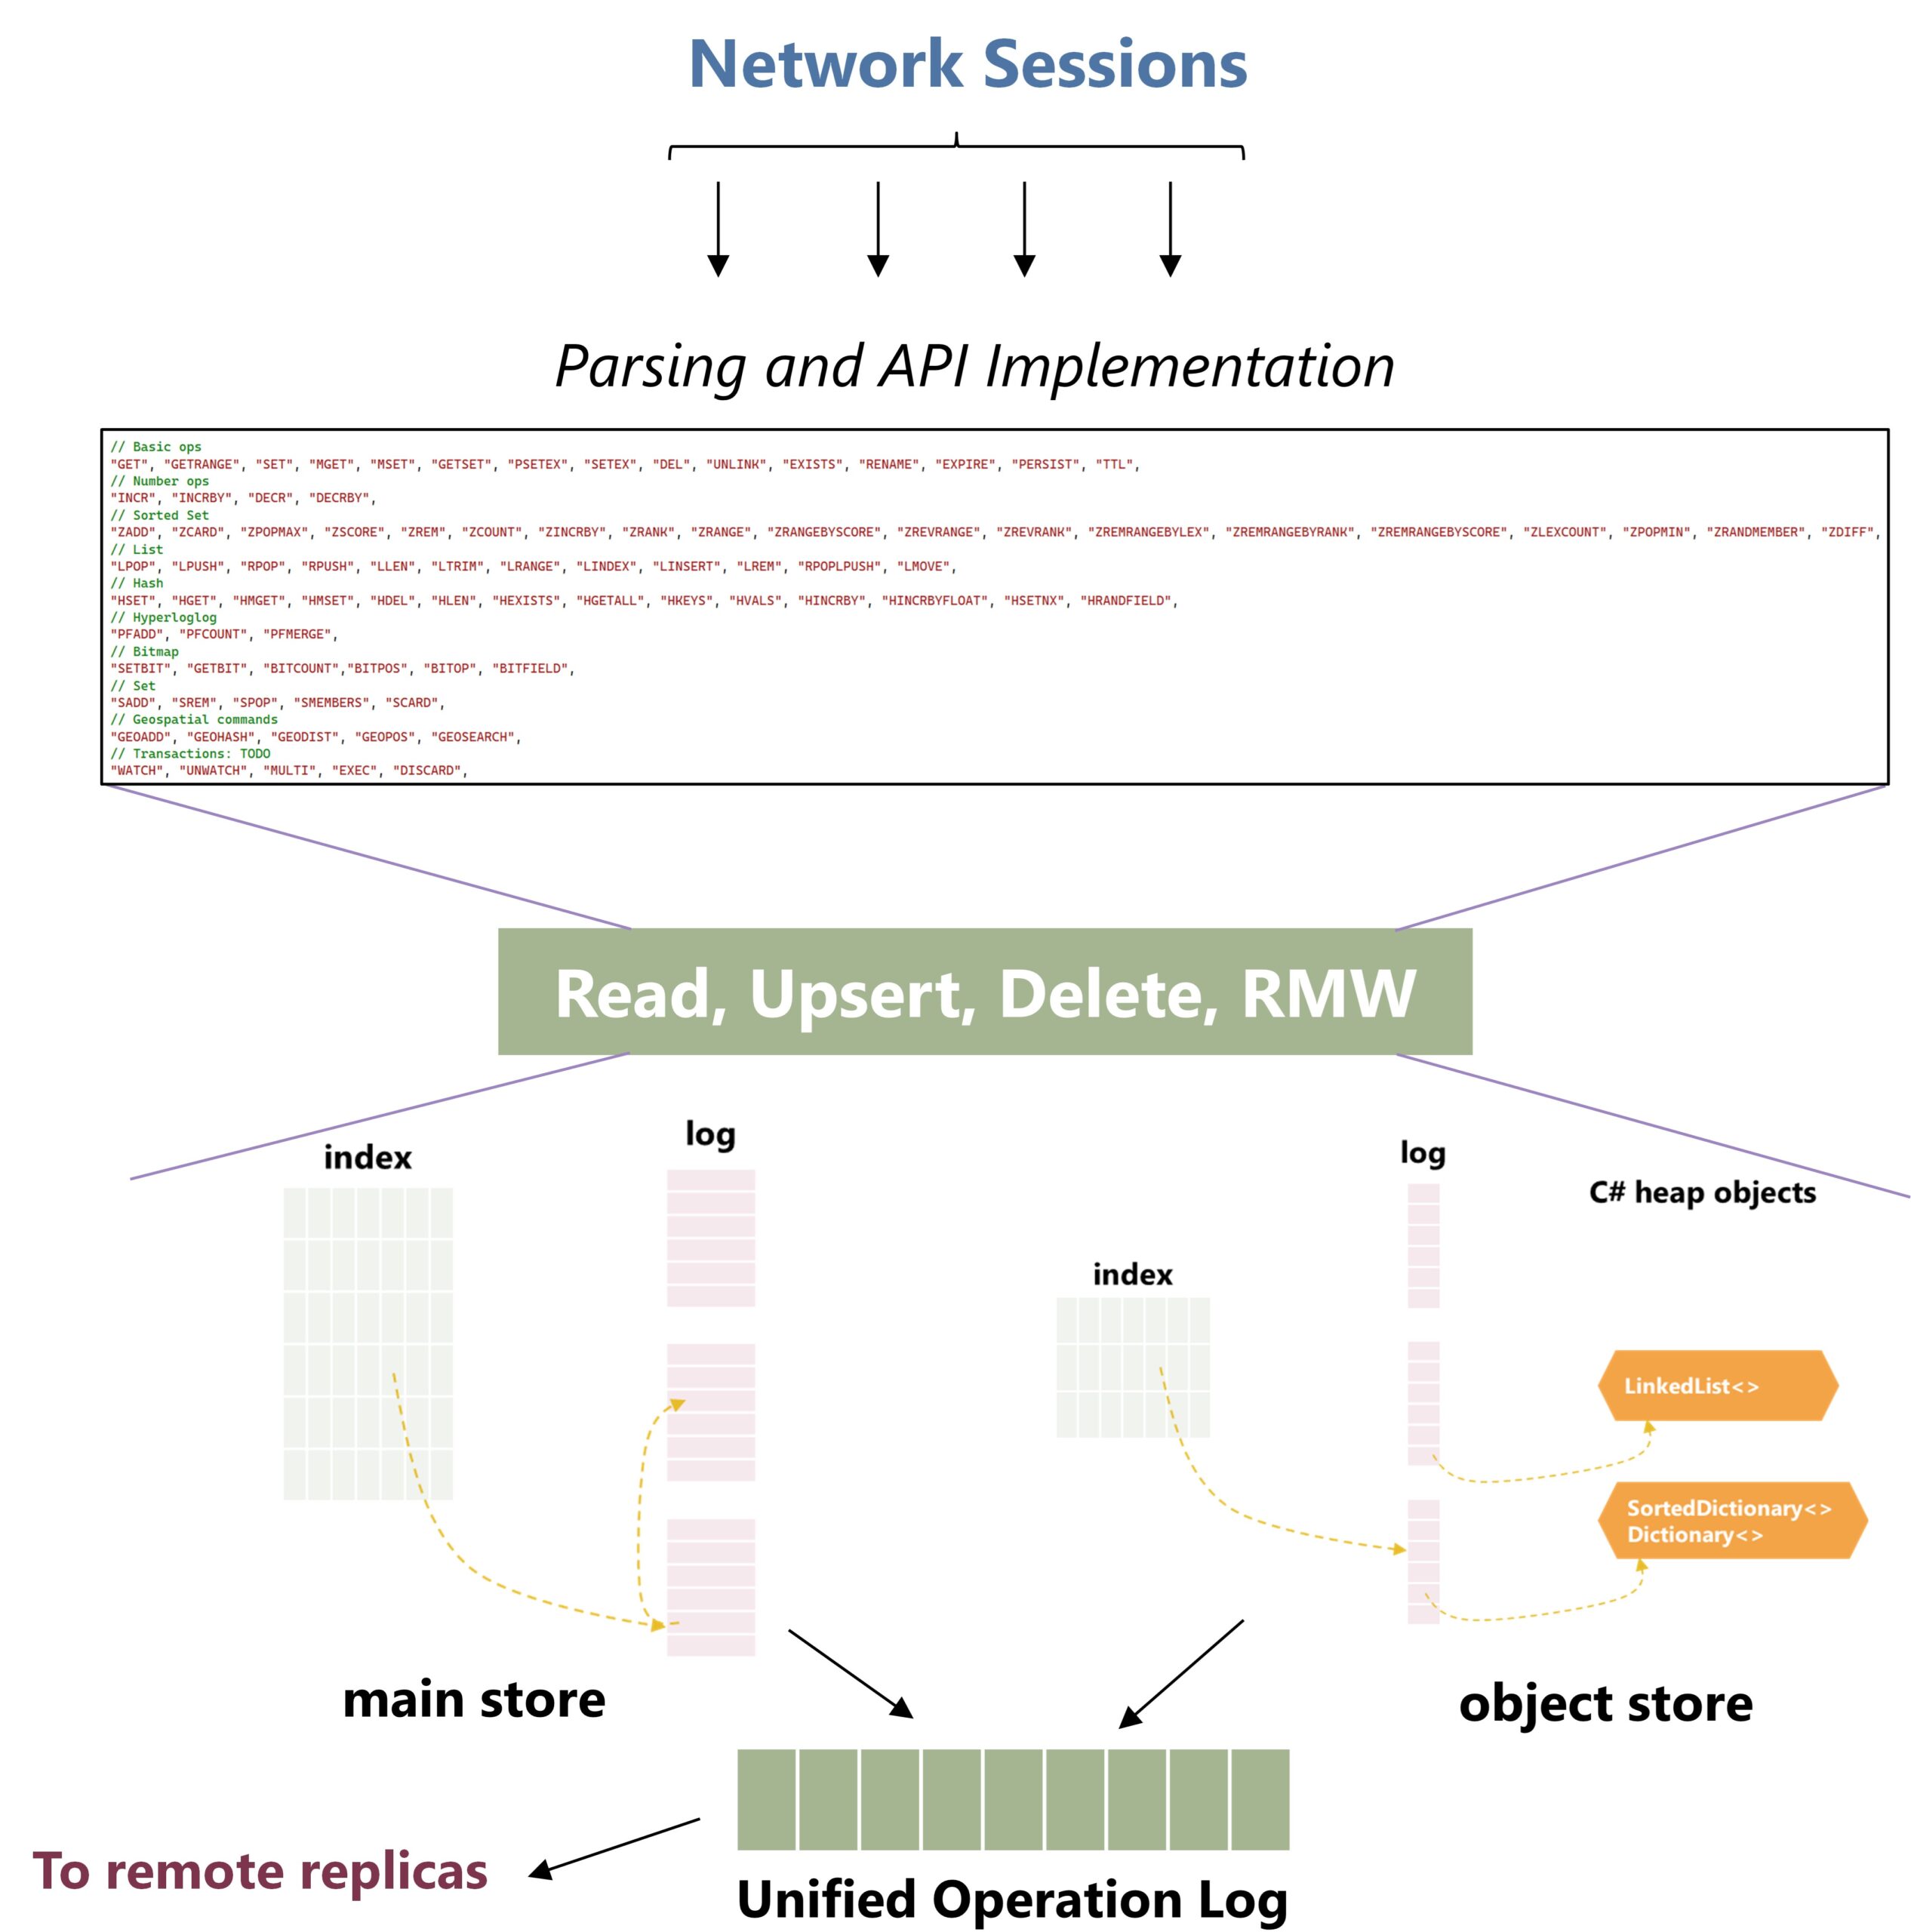 Overall architecture of Garnet. Shows multiple network sessions passing through a parsing and API implementation layer. The storage API is transformed into read, upsert, delete, and read-modify-write operations on the storage layer. Storage consists of a main store and an object store, which both feed into a unified operations log. The log may be relayed to remote replicas. 